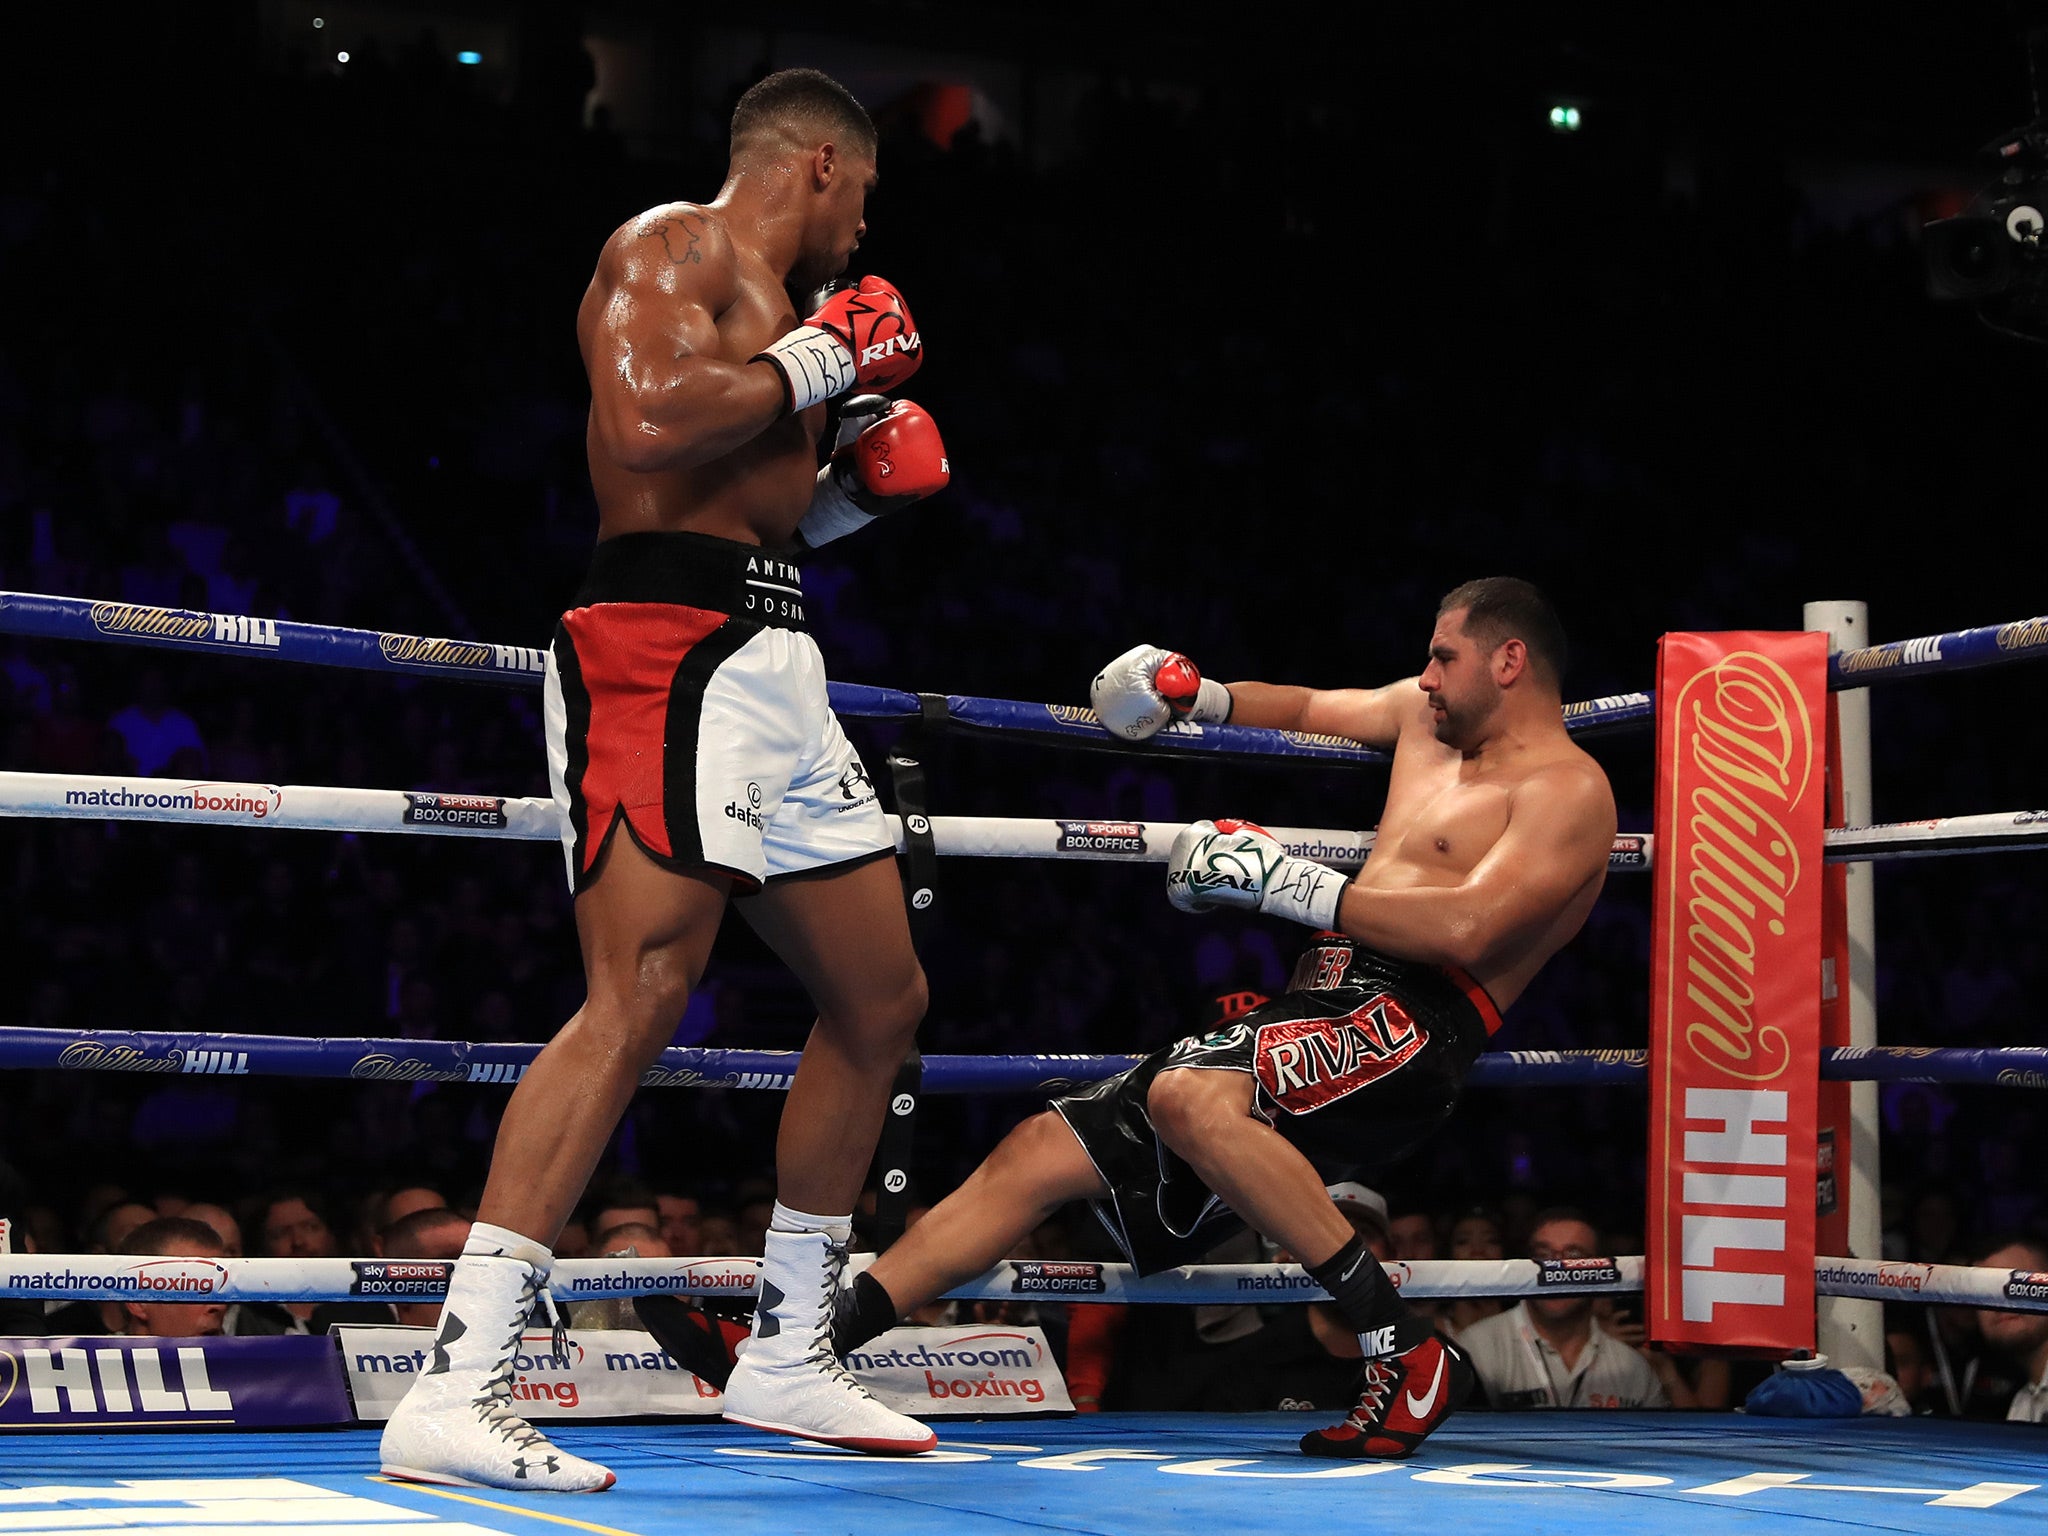 Joshua made light work of Molina, who claimed he'd never been hit so hard